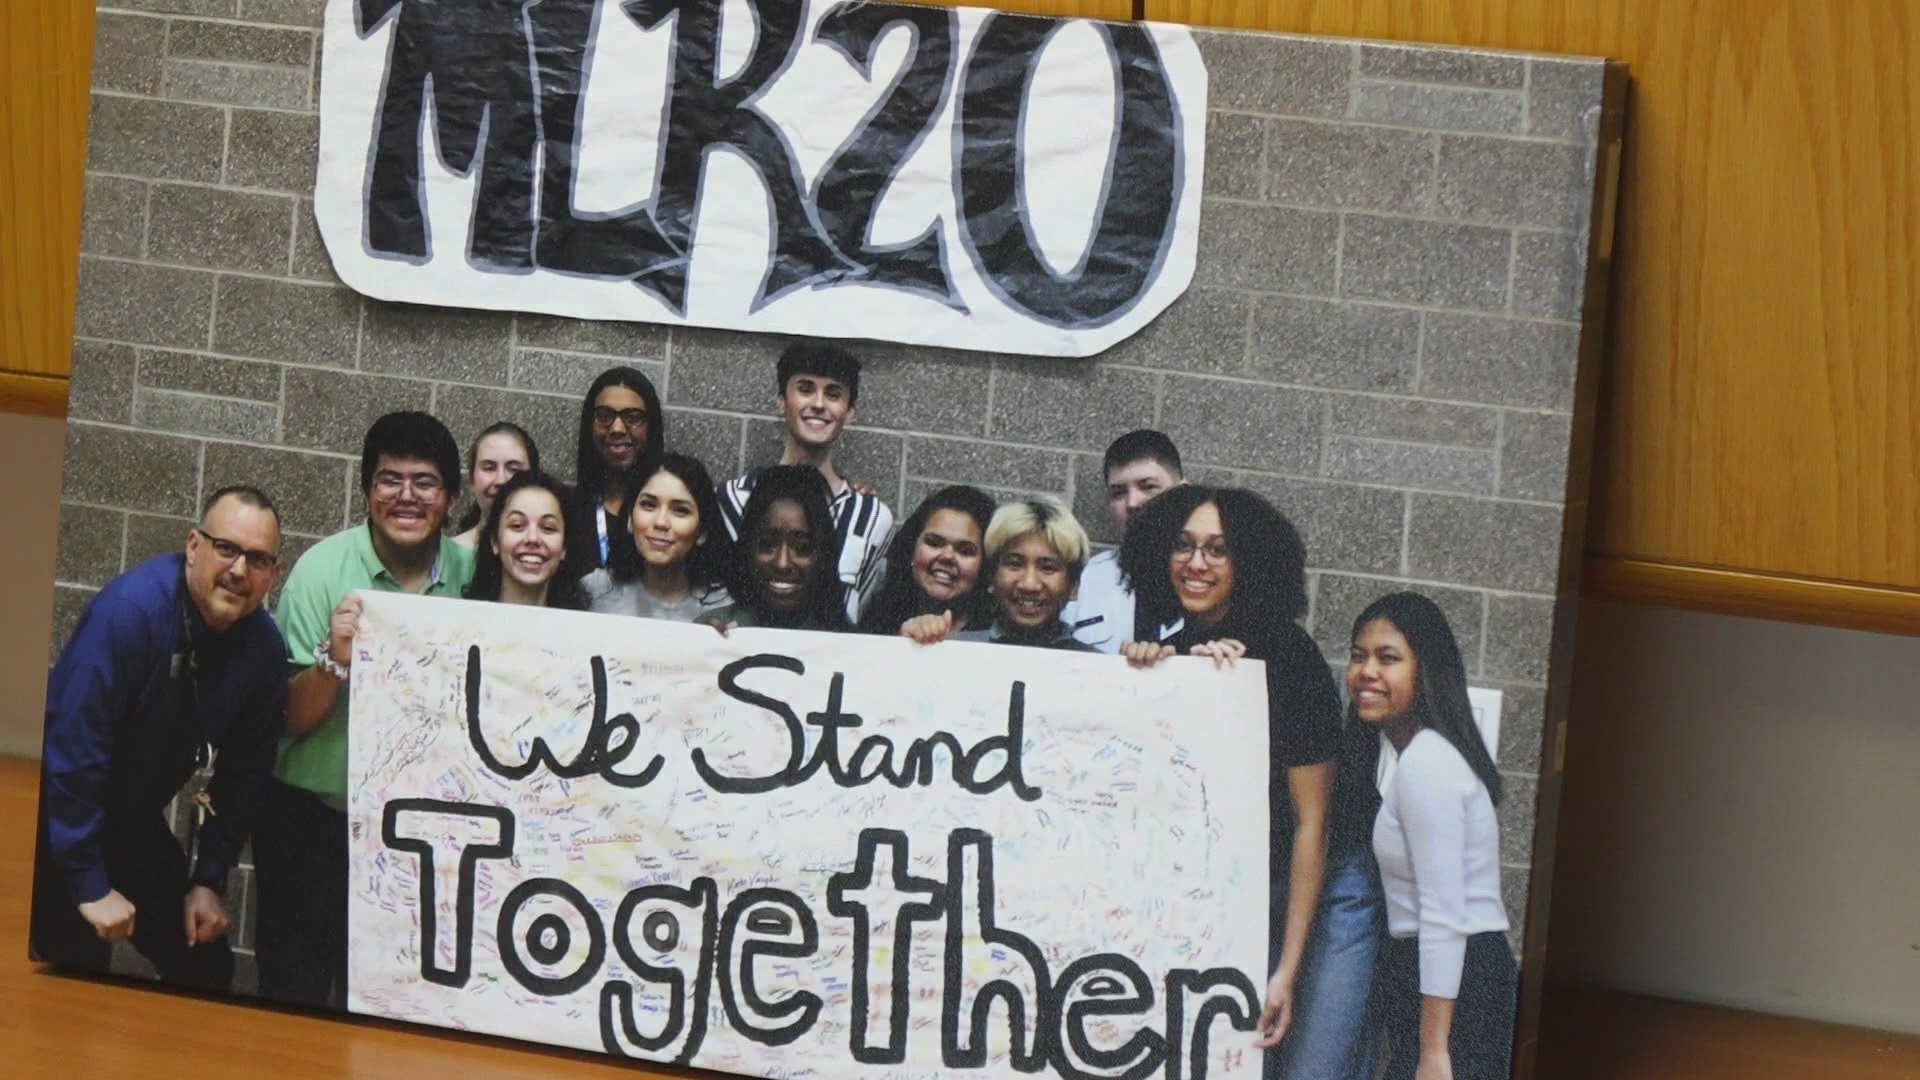 The hallways of Arlington High School are undergoing a transformation to become more welcoming and inclusive, thanks to a student led Diversity Council.